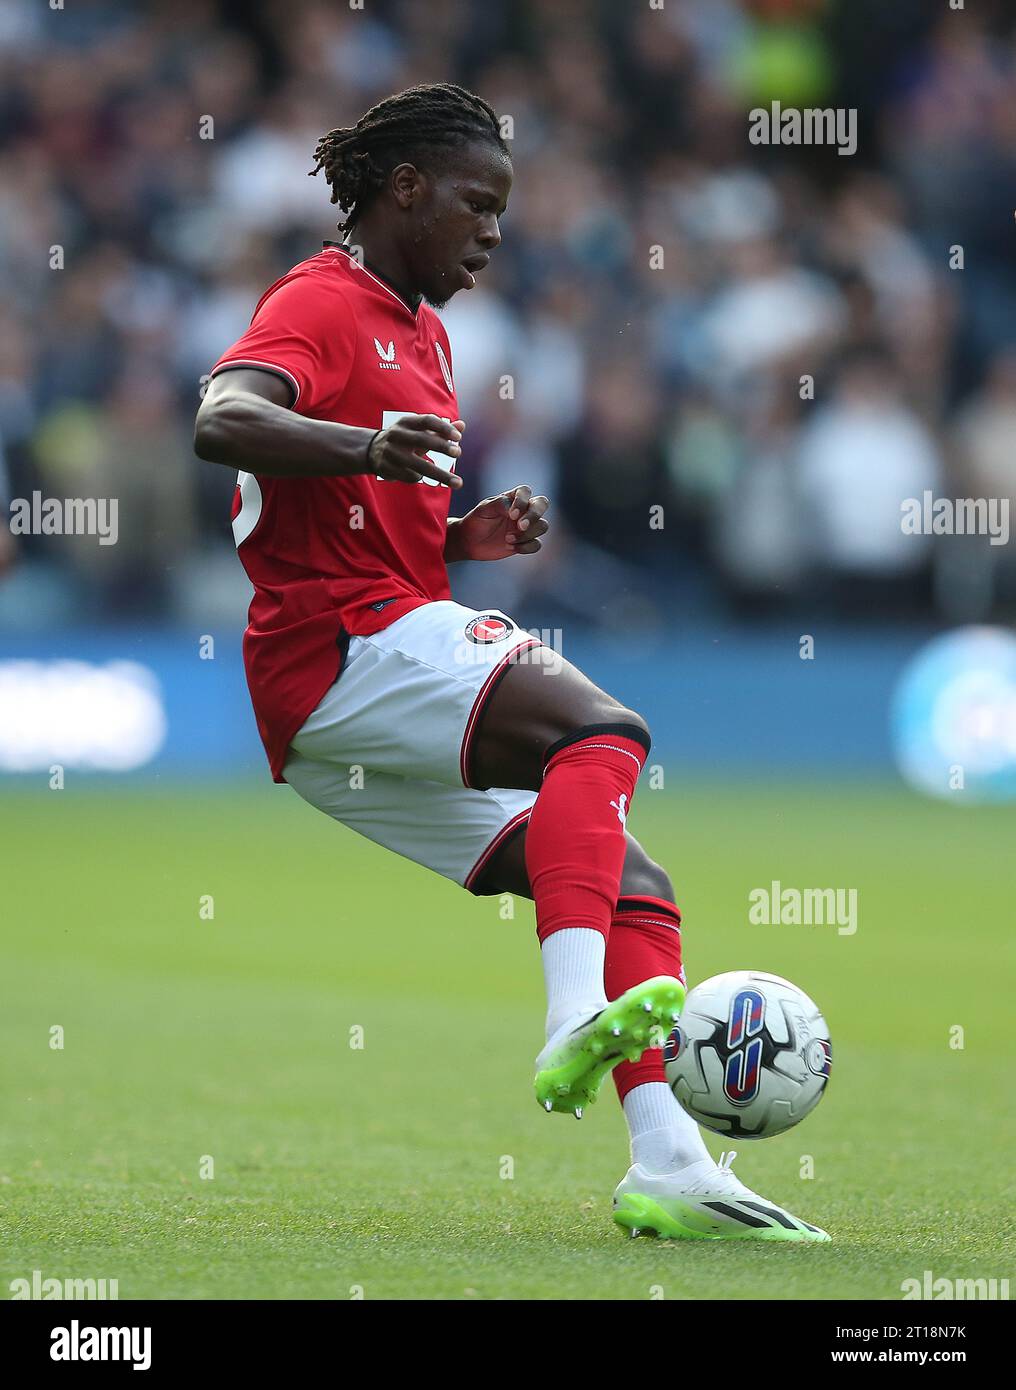 Karoy Anderson of Charlton Athletic. - Millwall v Charlton Athletic, Pre Season Friendly, The New Den Stadium, London, UK - 25th July 2023. Editorial Use Only - DataCo restrictions apply Stock Photo